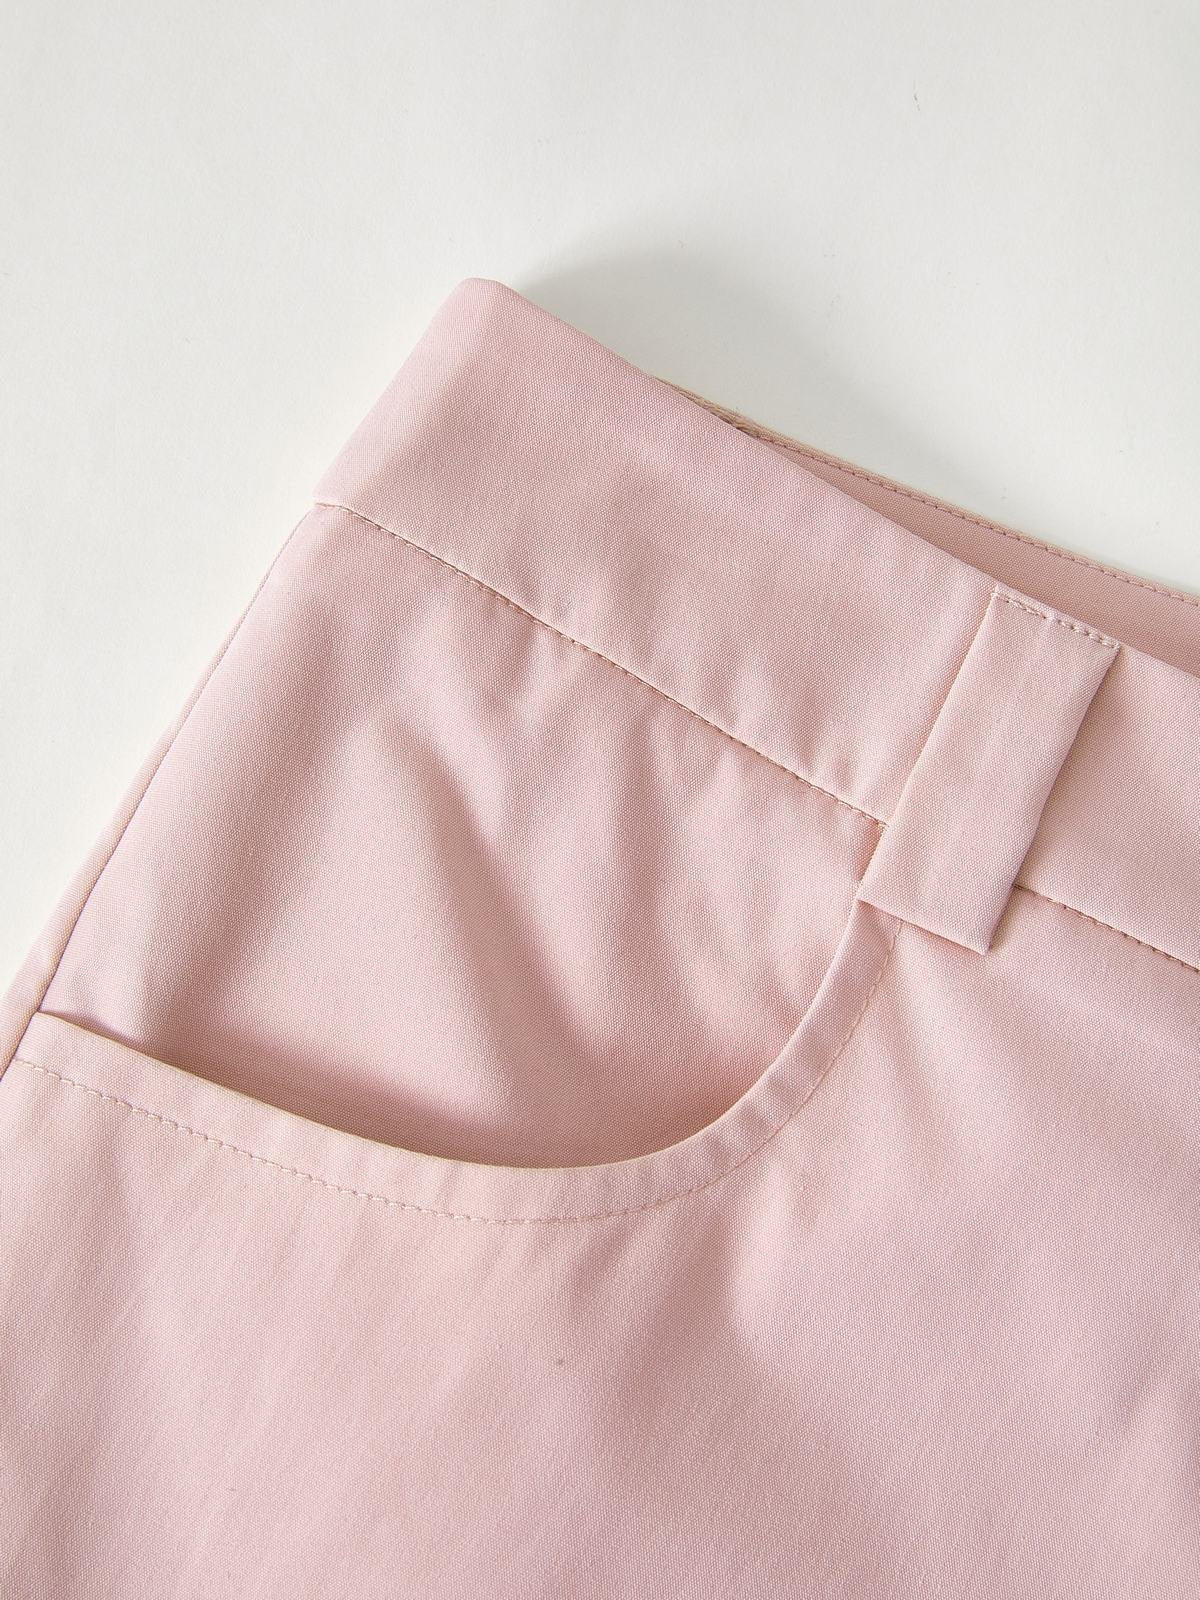 Ruffled Pink Cargo Pants with Straight Leg